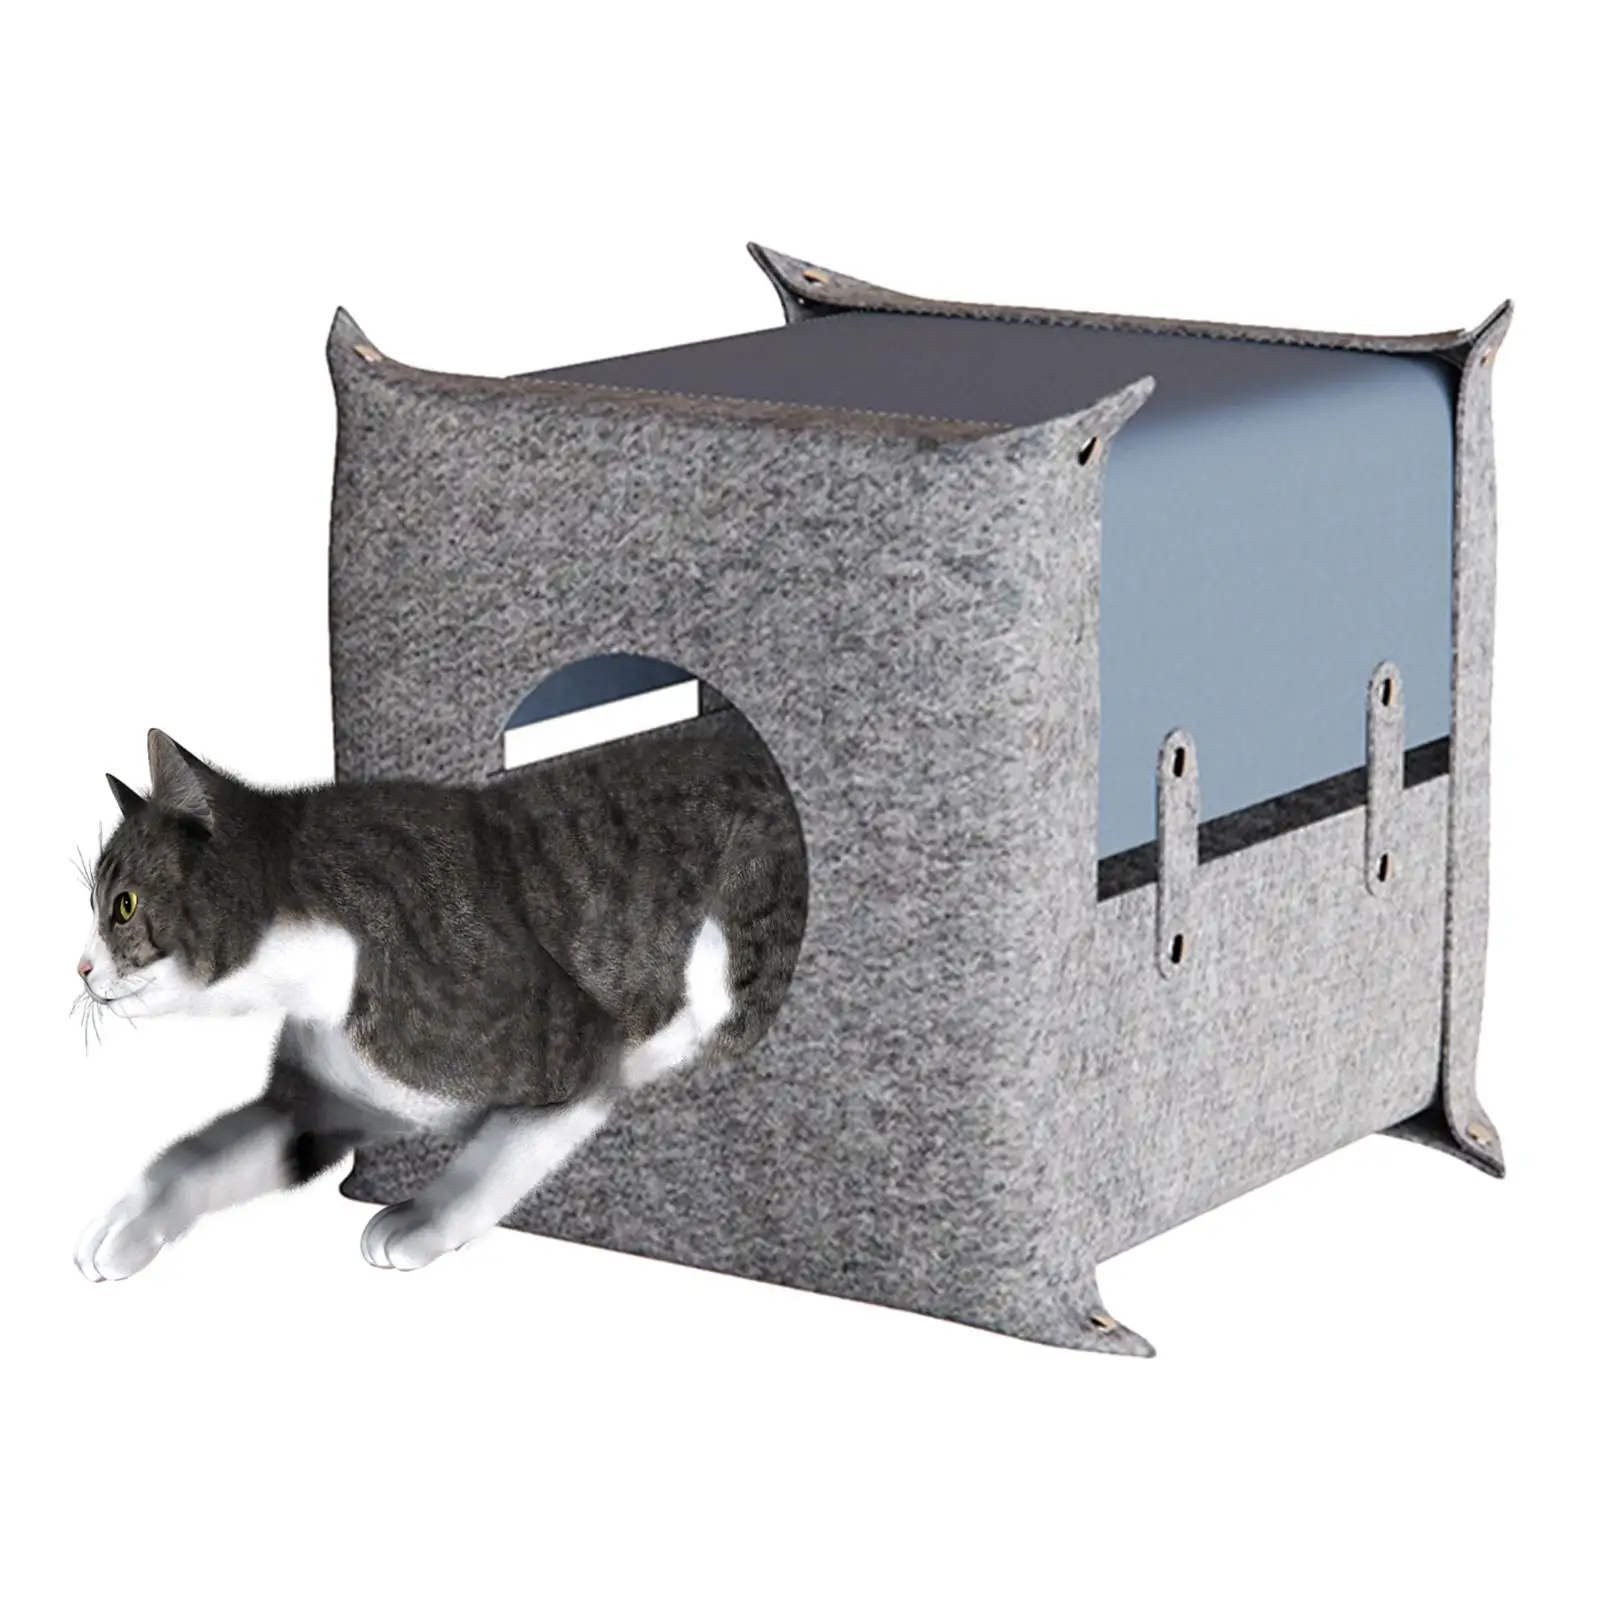 Felt Cats Cave Sleeping Bed for Indoor Cats, Lounger Playhouse Tent